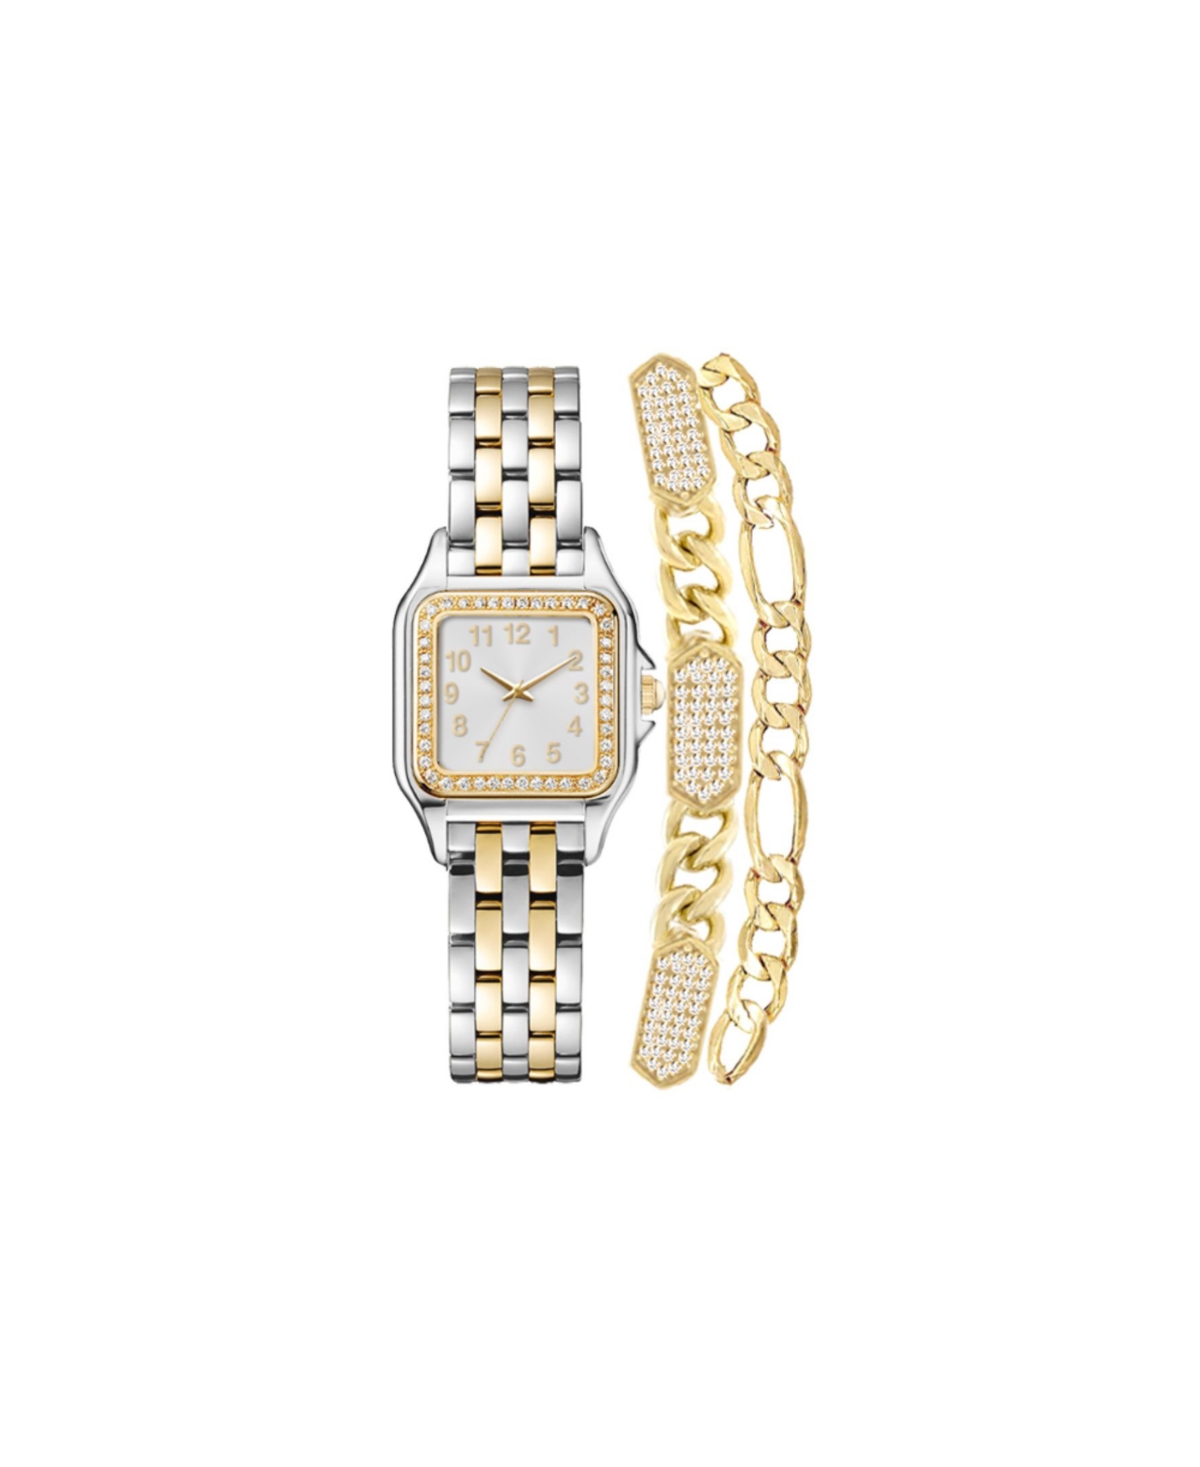 Women's Analog Silver-Tone and Gold-Tone Metal Alloy Watch 26mm and, 3 Pieces - Shiny Silver, Gold